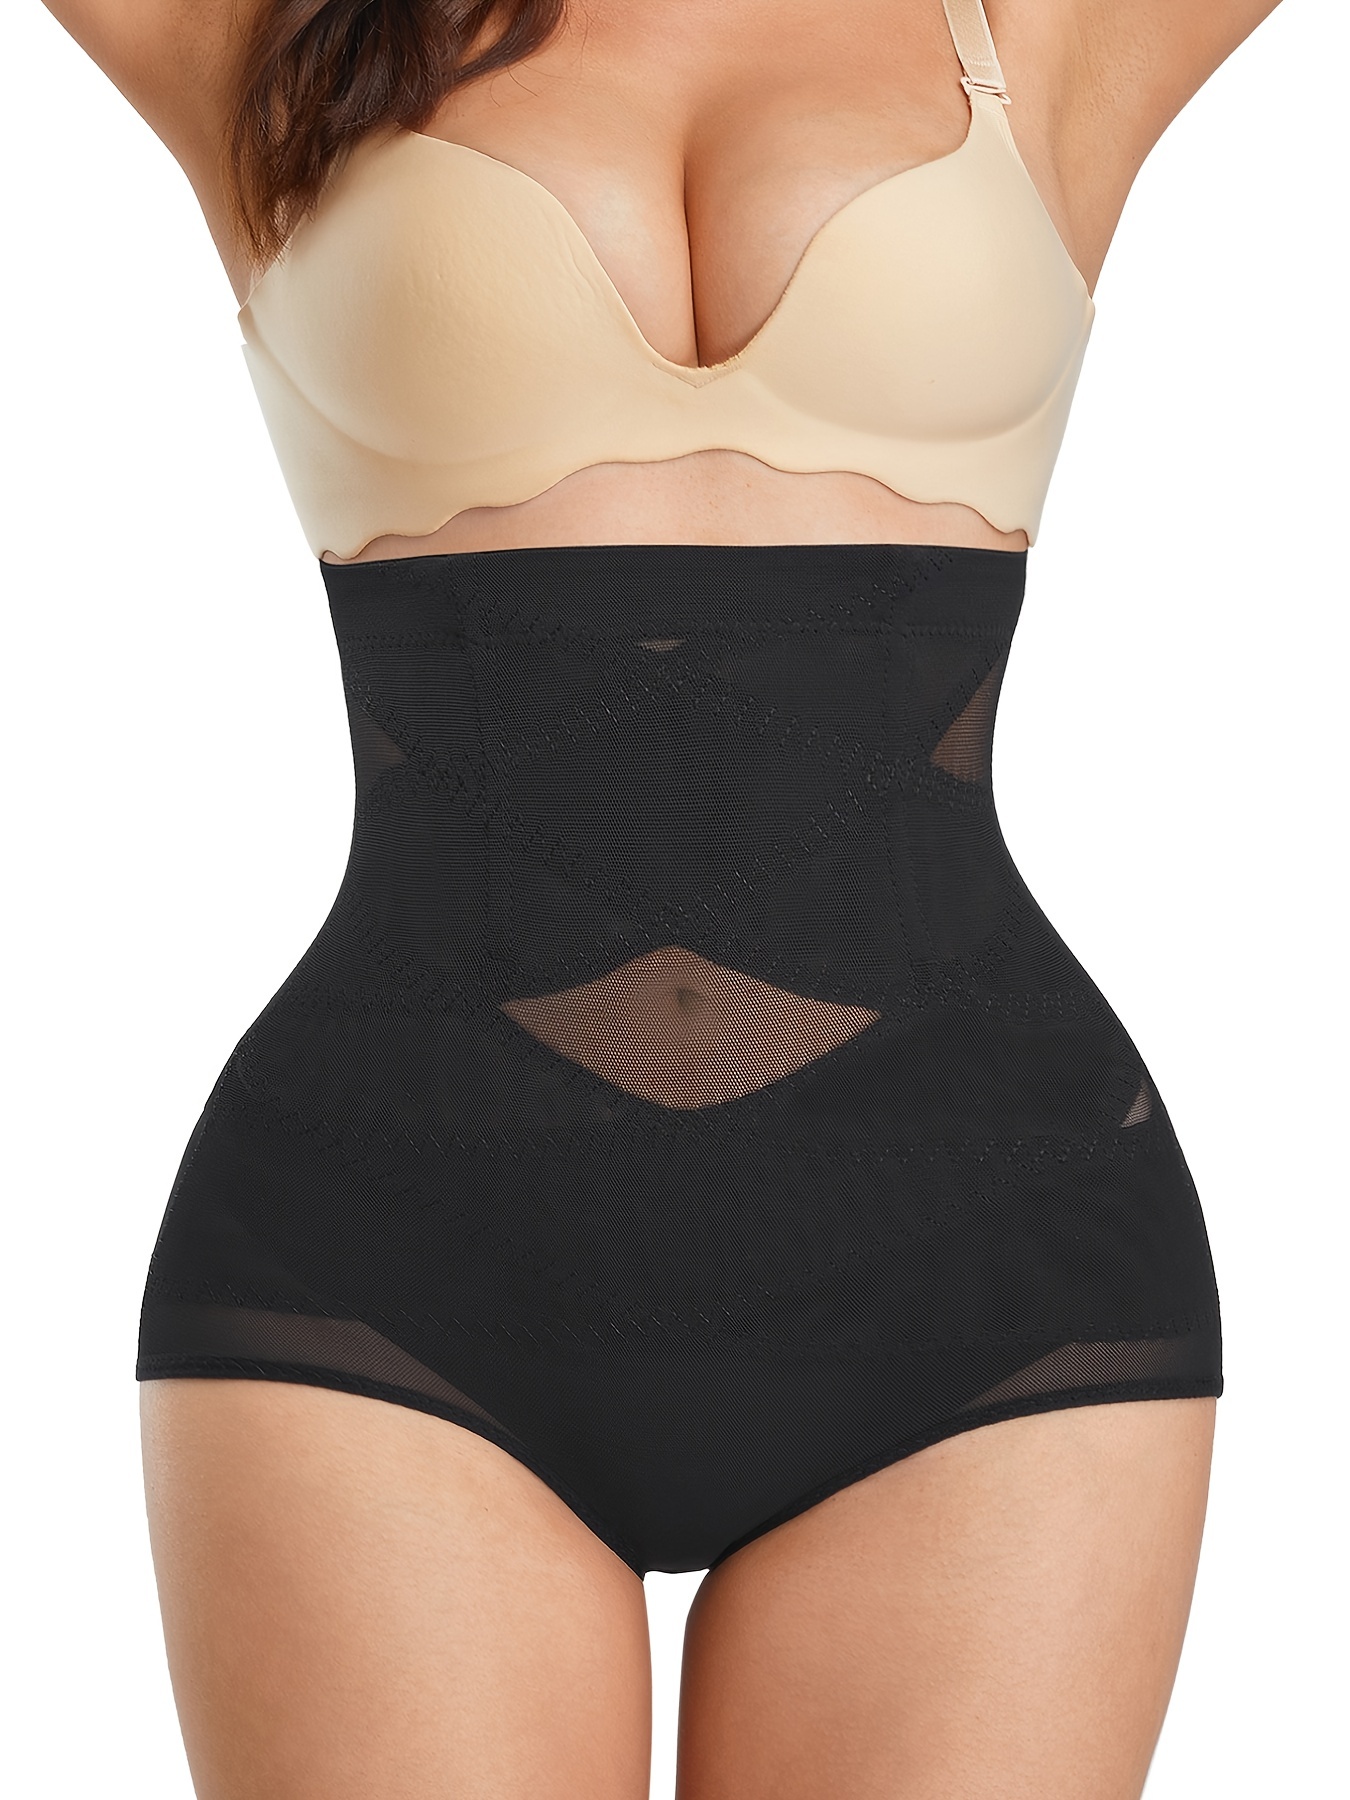  Lingerie Shapewear for women Slimming Soft waist and